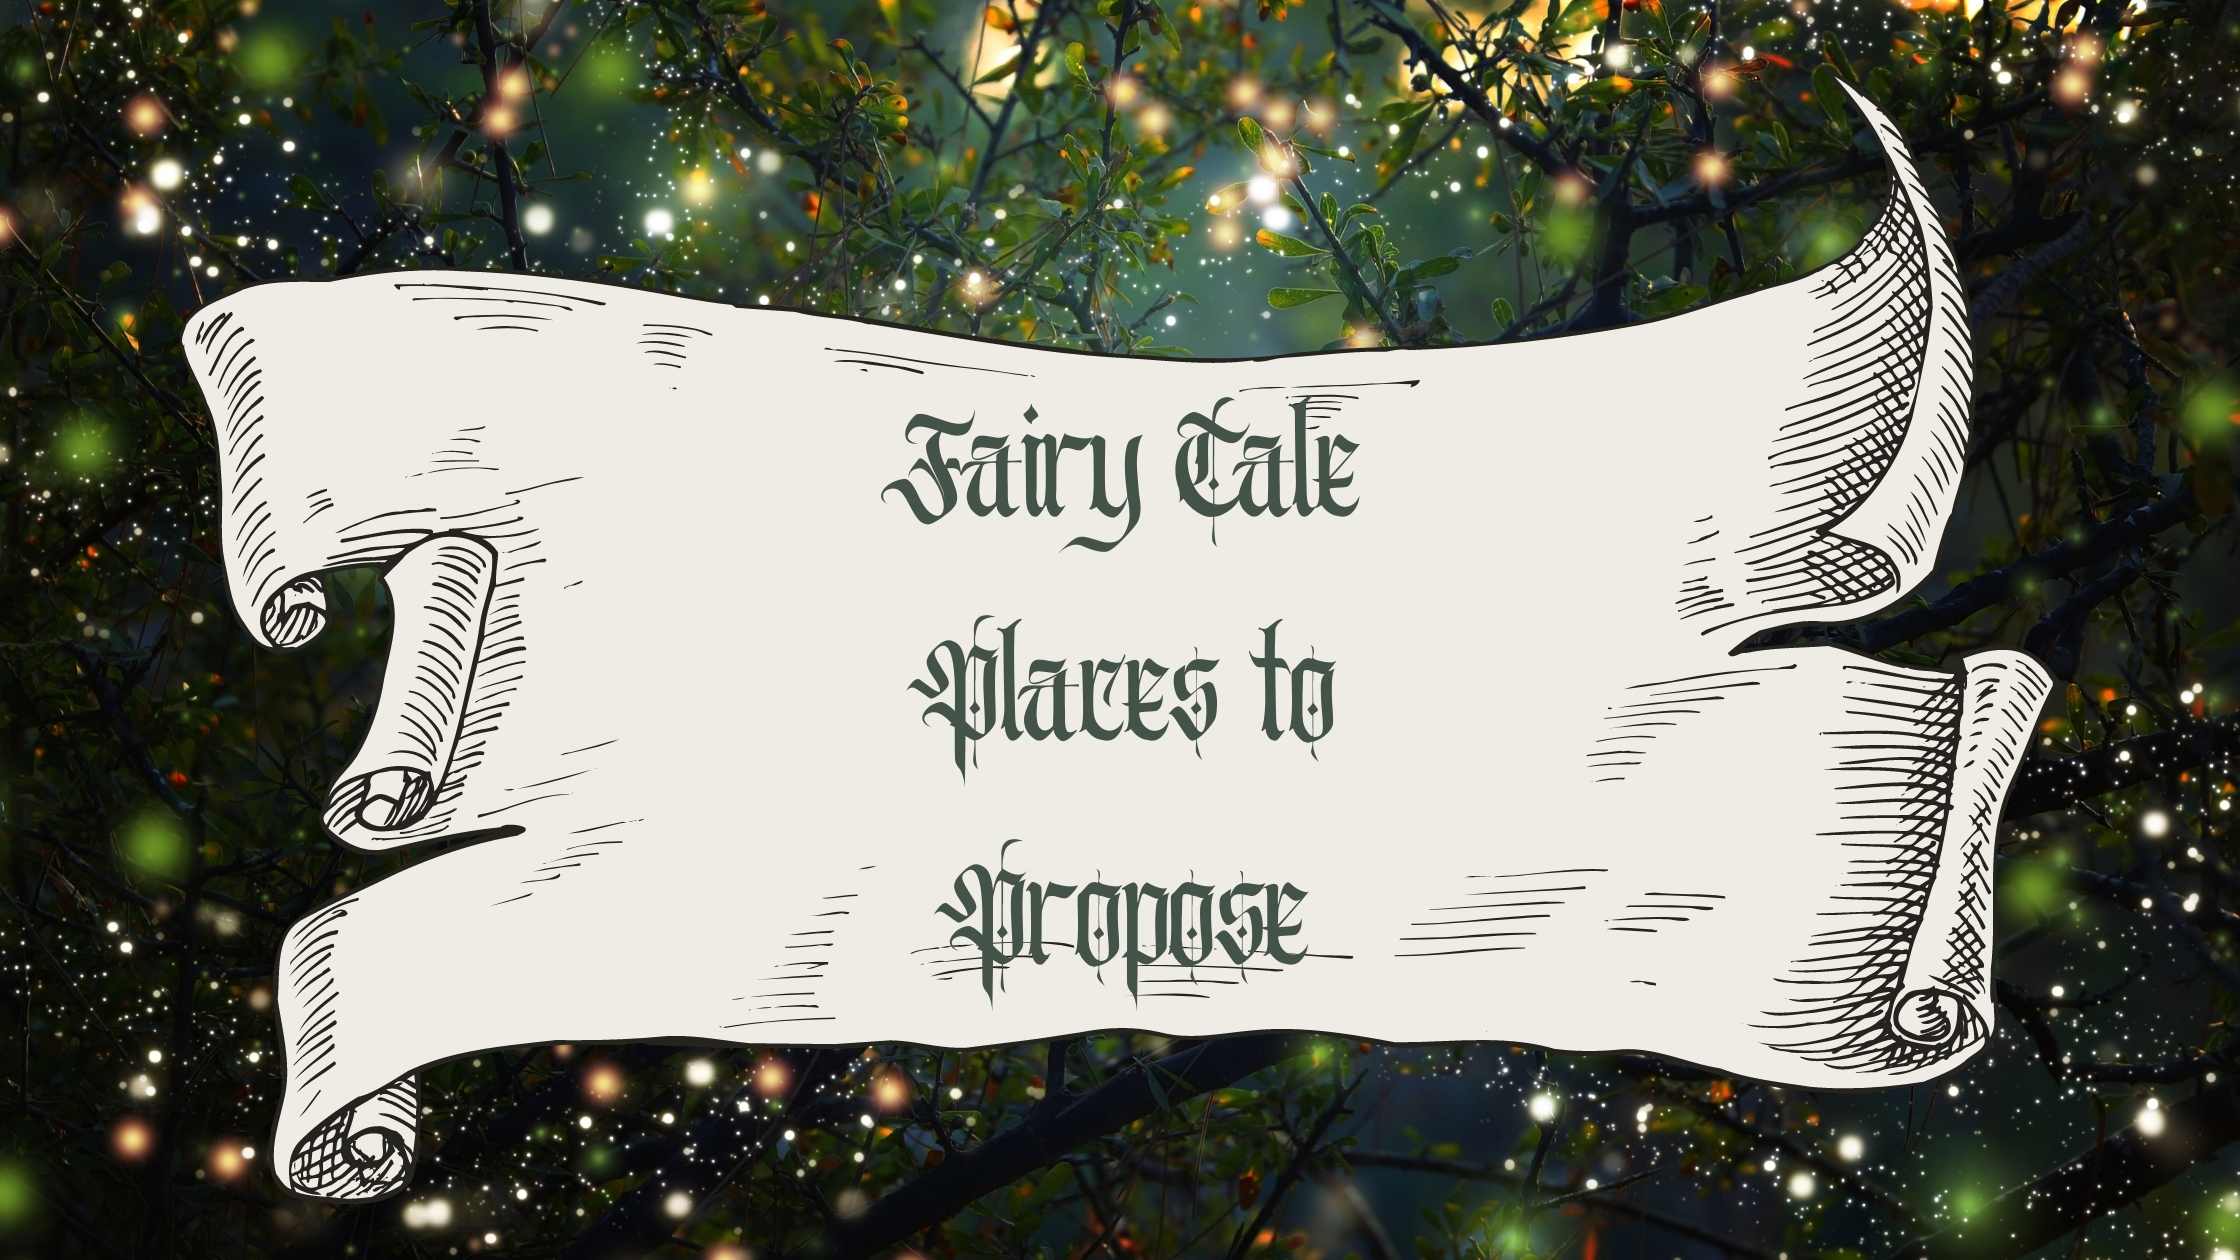 Fairy Tale Places to Propose